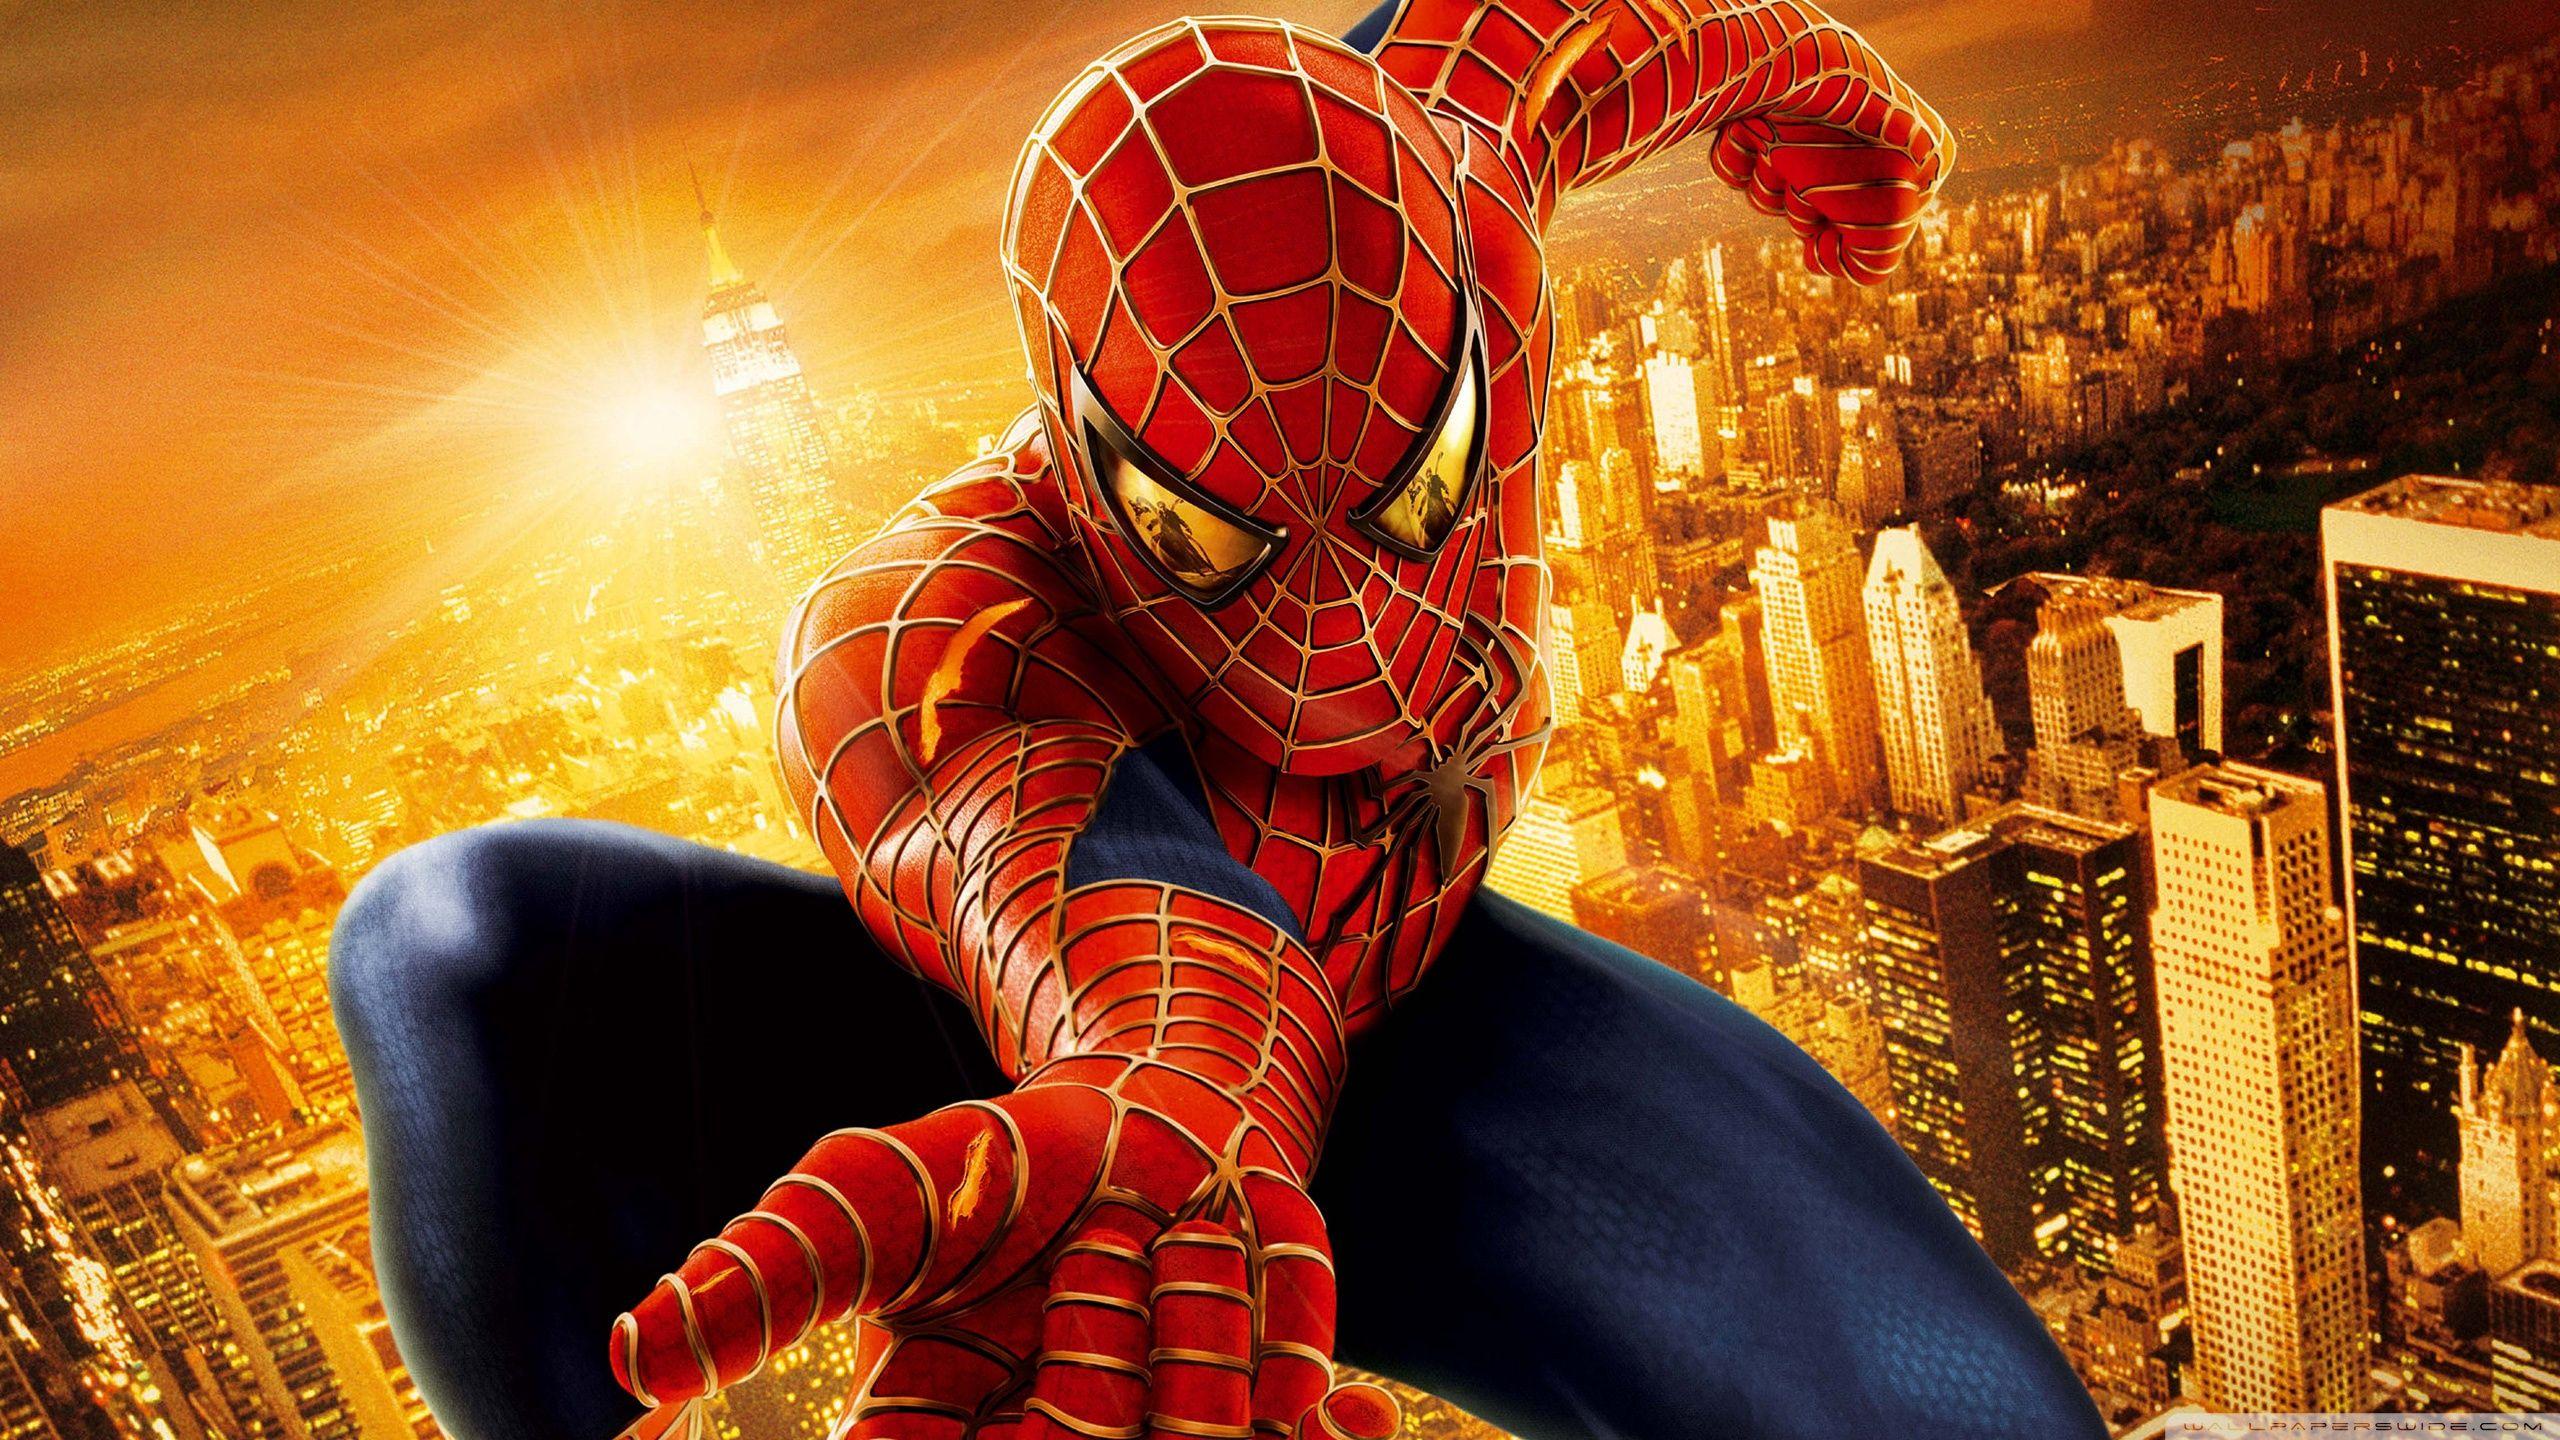 Spiderman 3 164780641 Picture for Free › Cool HD Quality Image